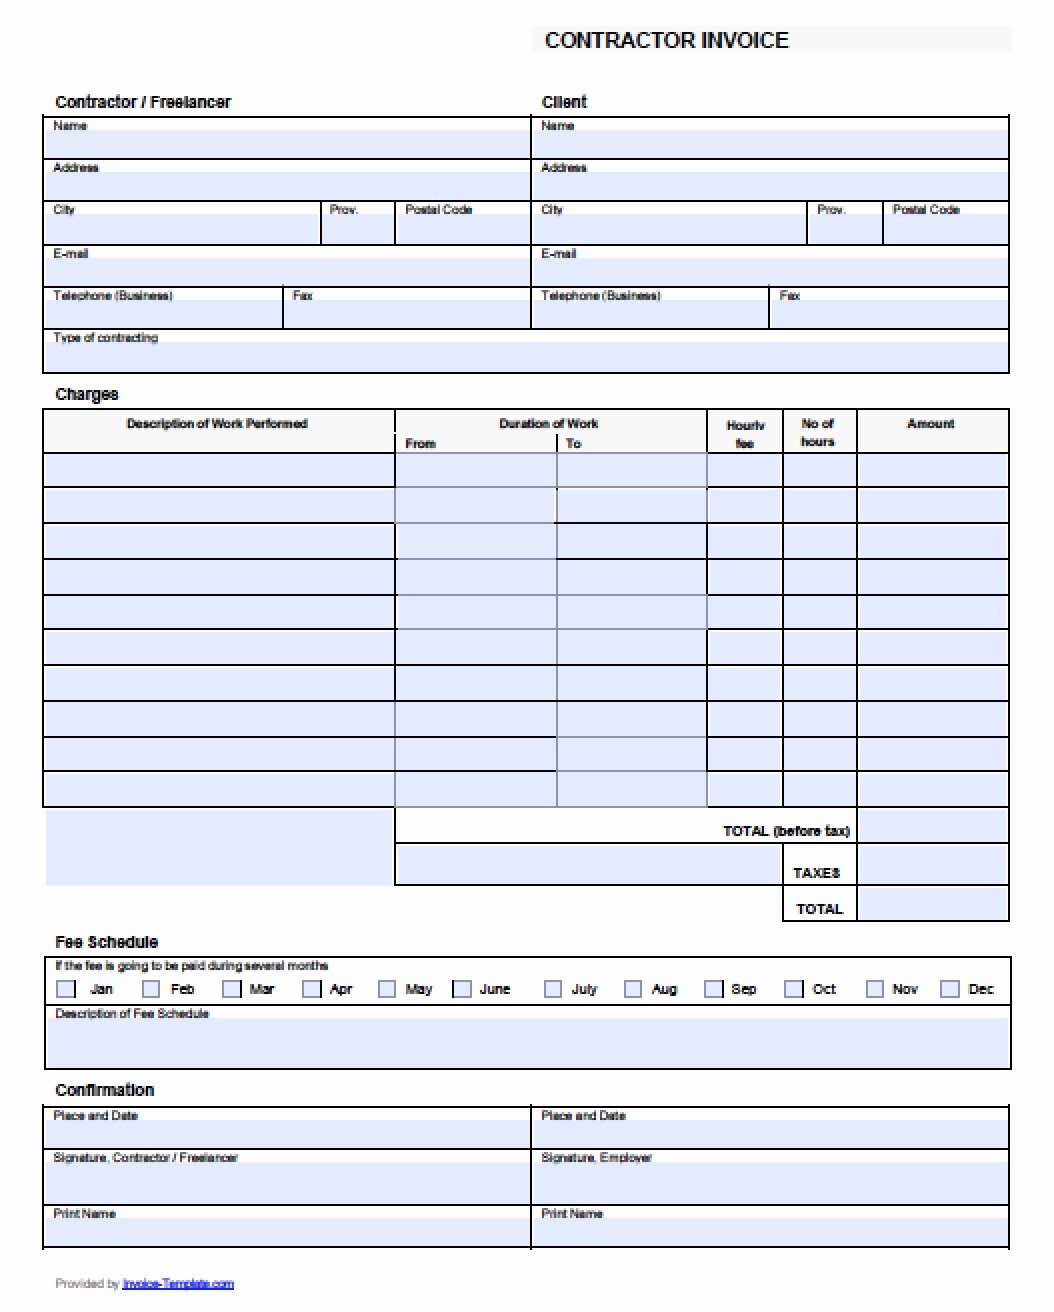 Contractor Invoice Template Excel Awesome Free Contractor Invoice Template Excel Pdf